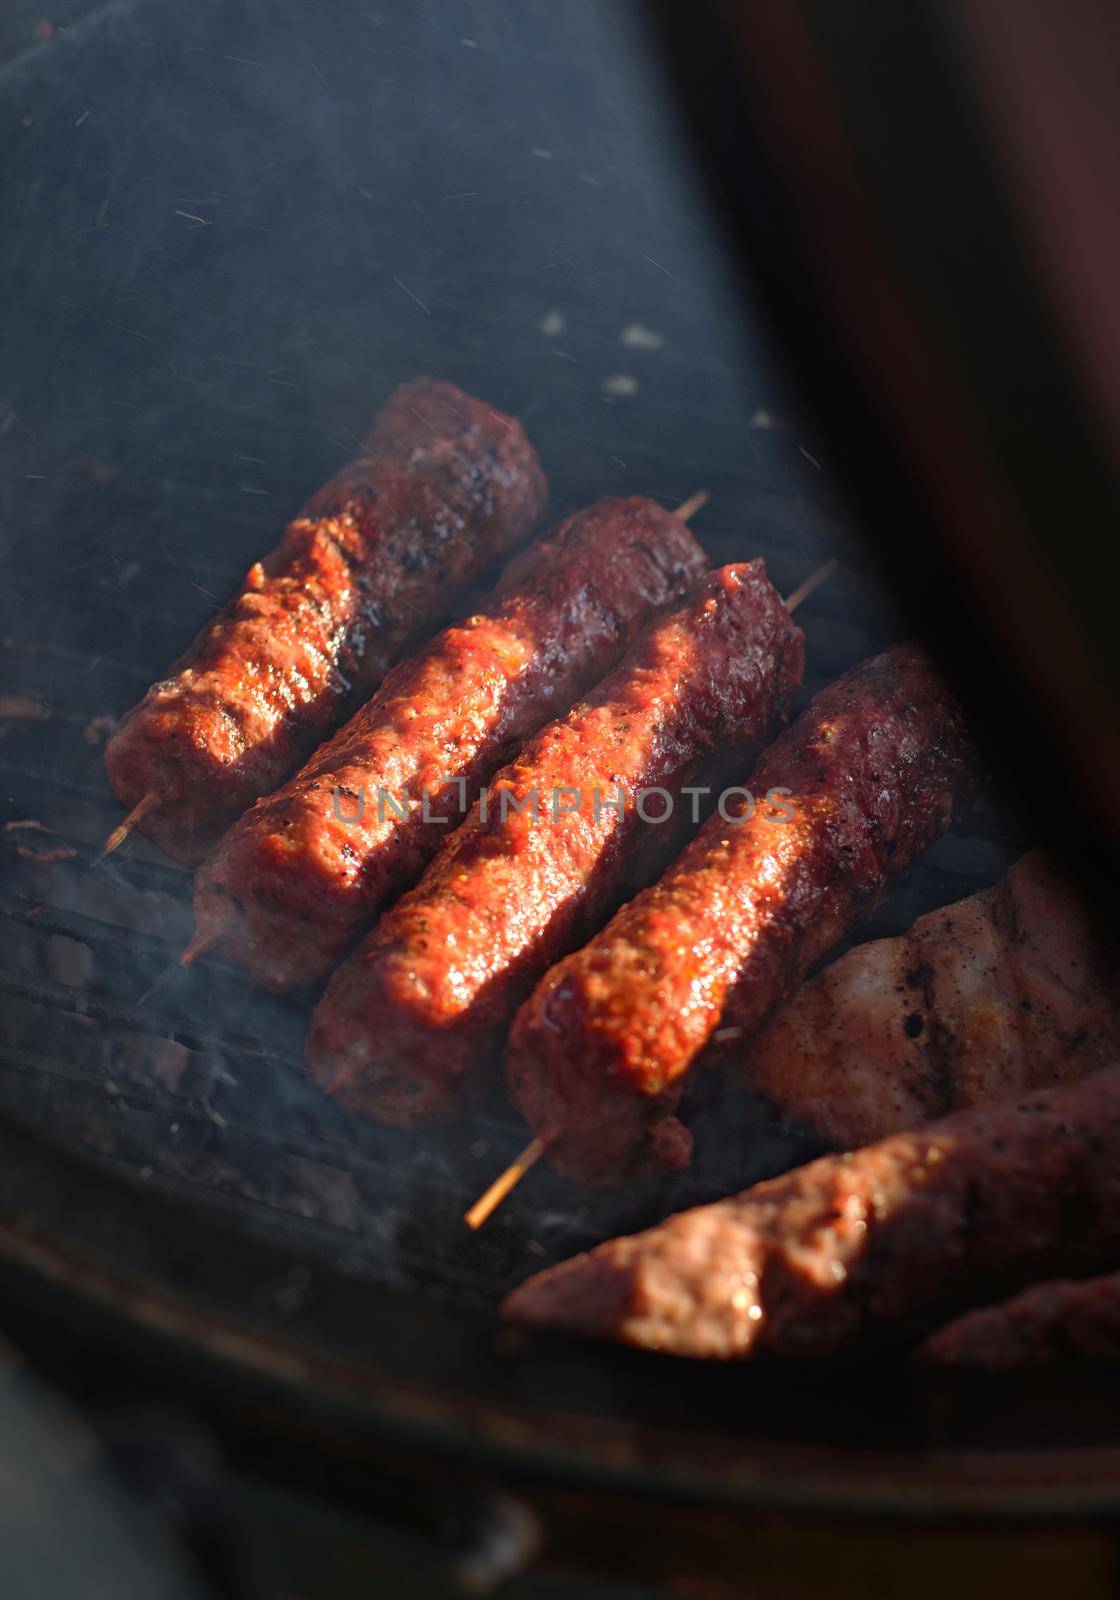 American Street food on cooking grill Sausages, street food